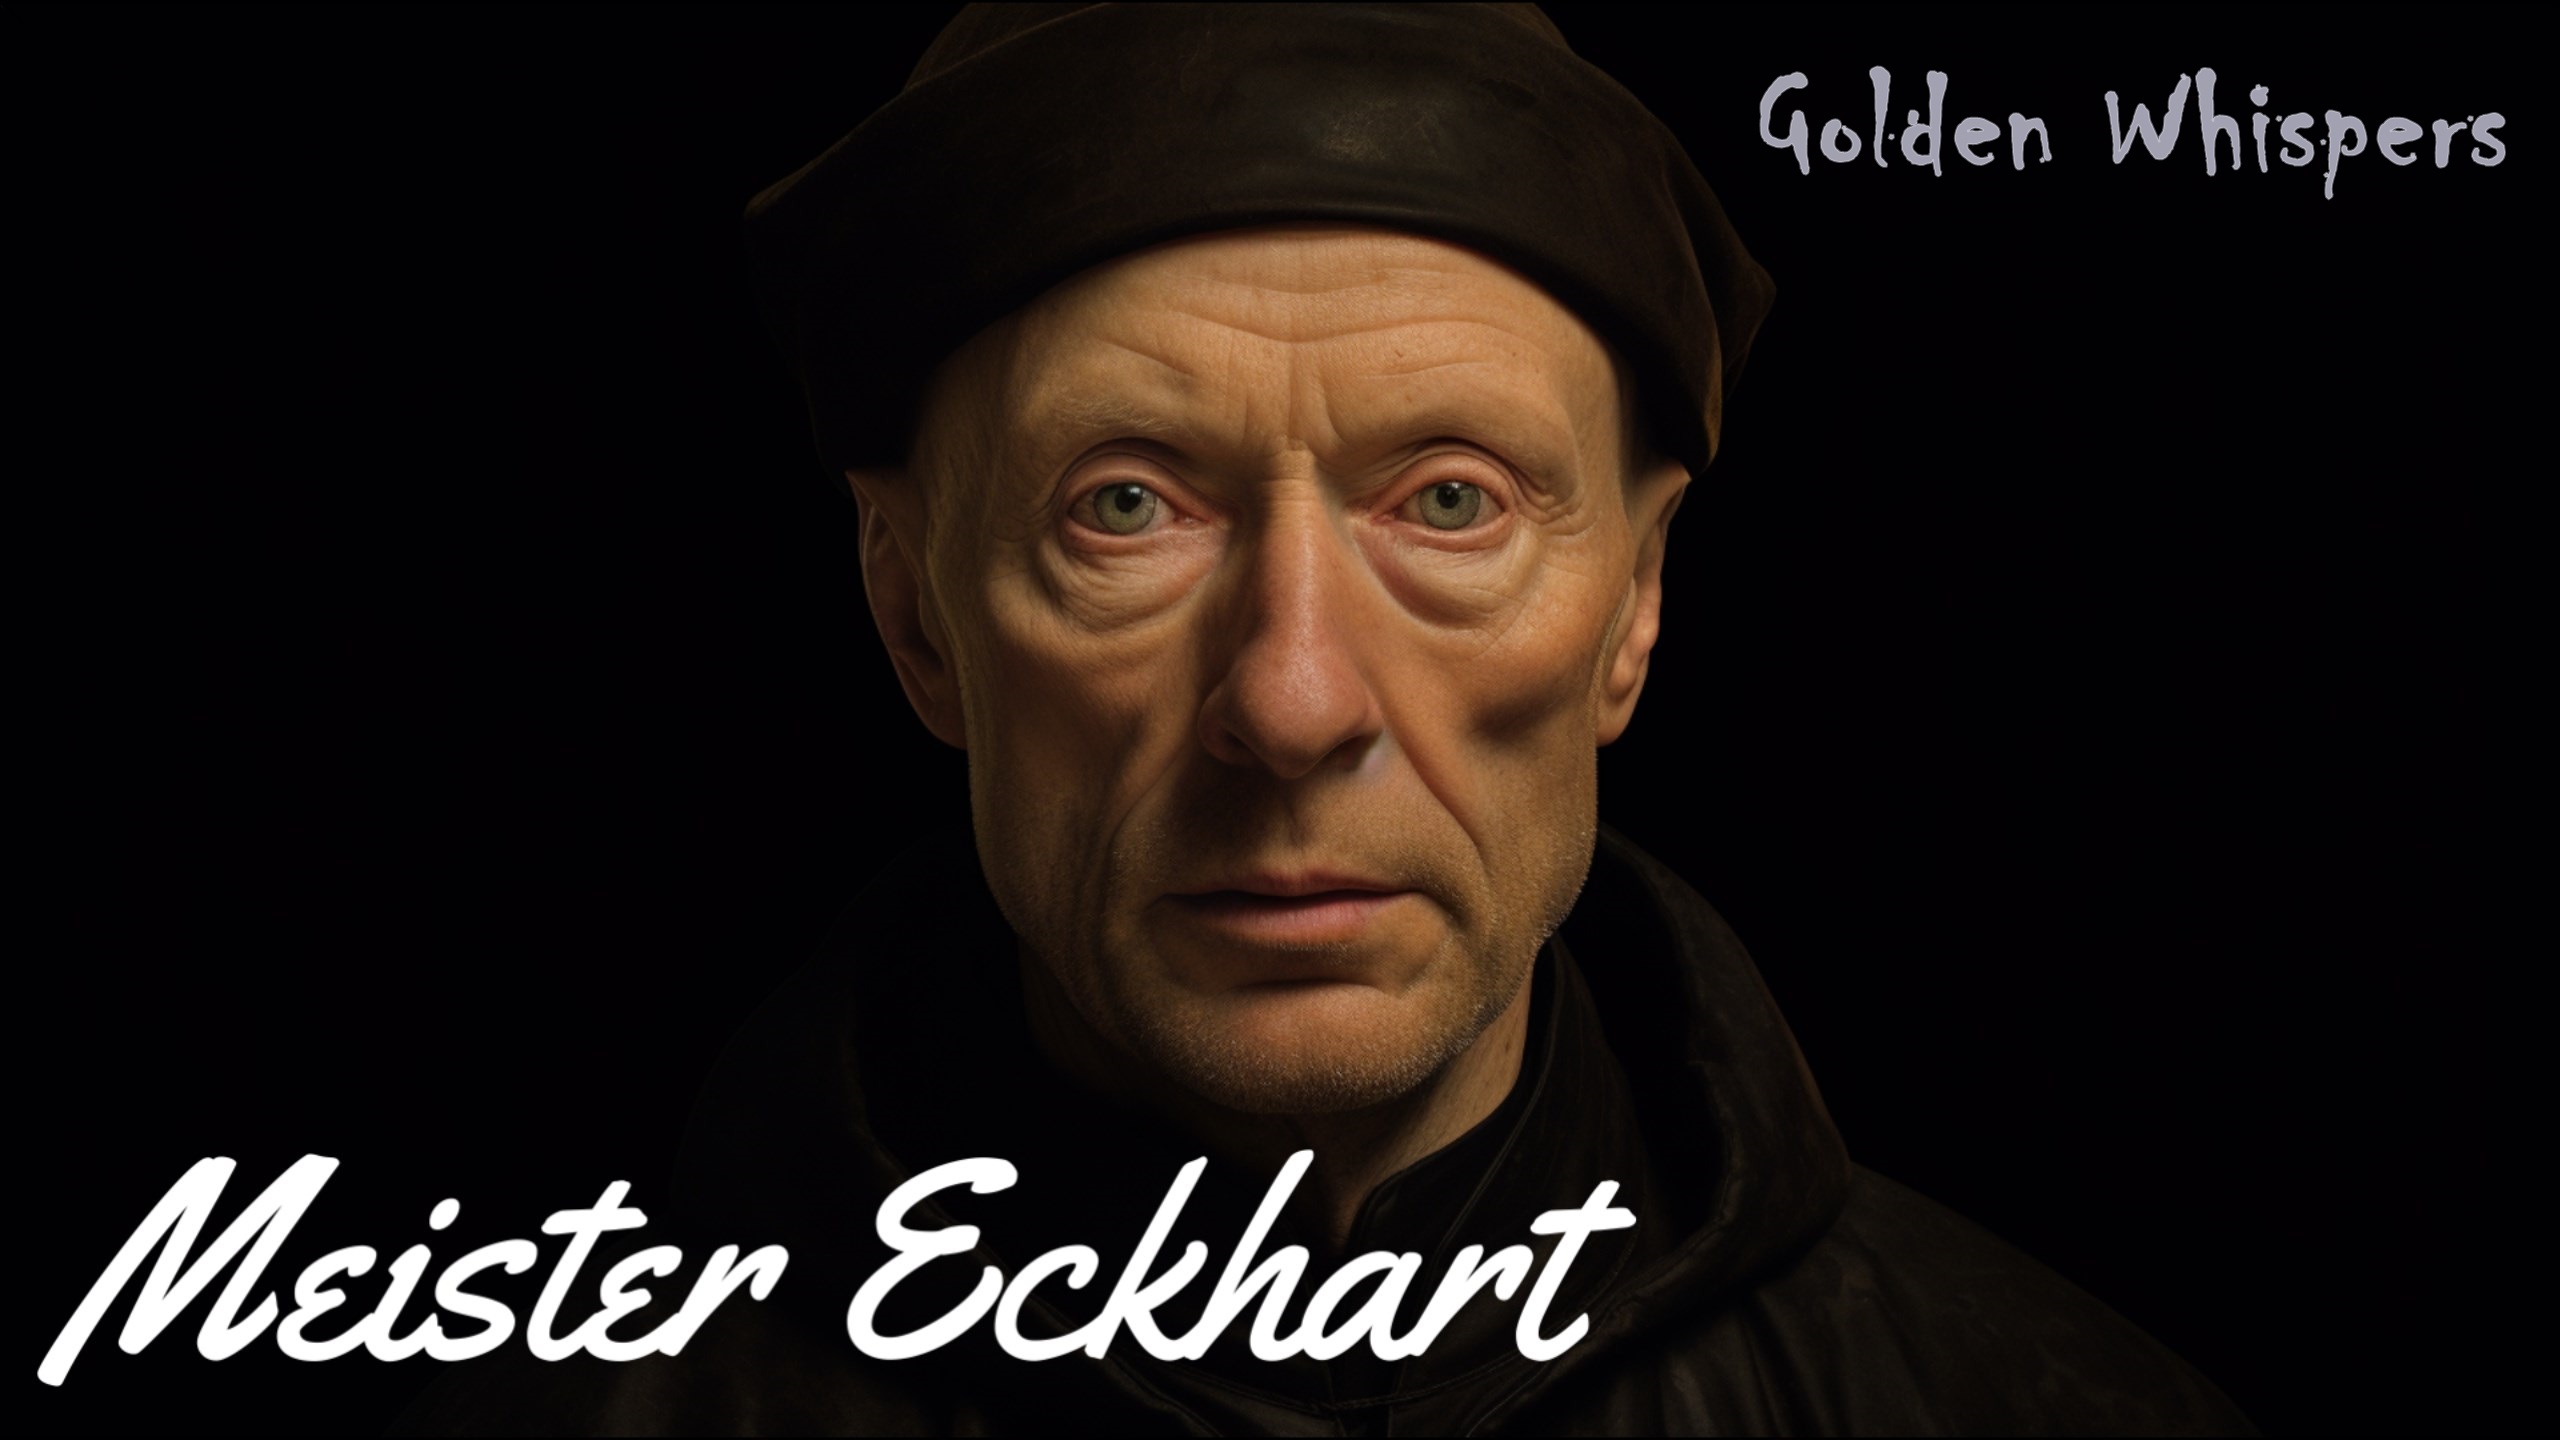 Meister Eckhart’s Mysticism – Golden Whispers #deepthoughts #selfdiscovery #spirituality